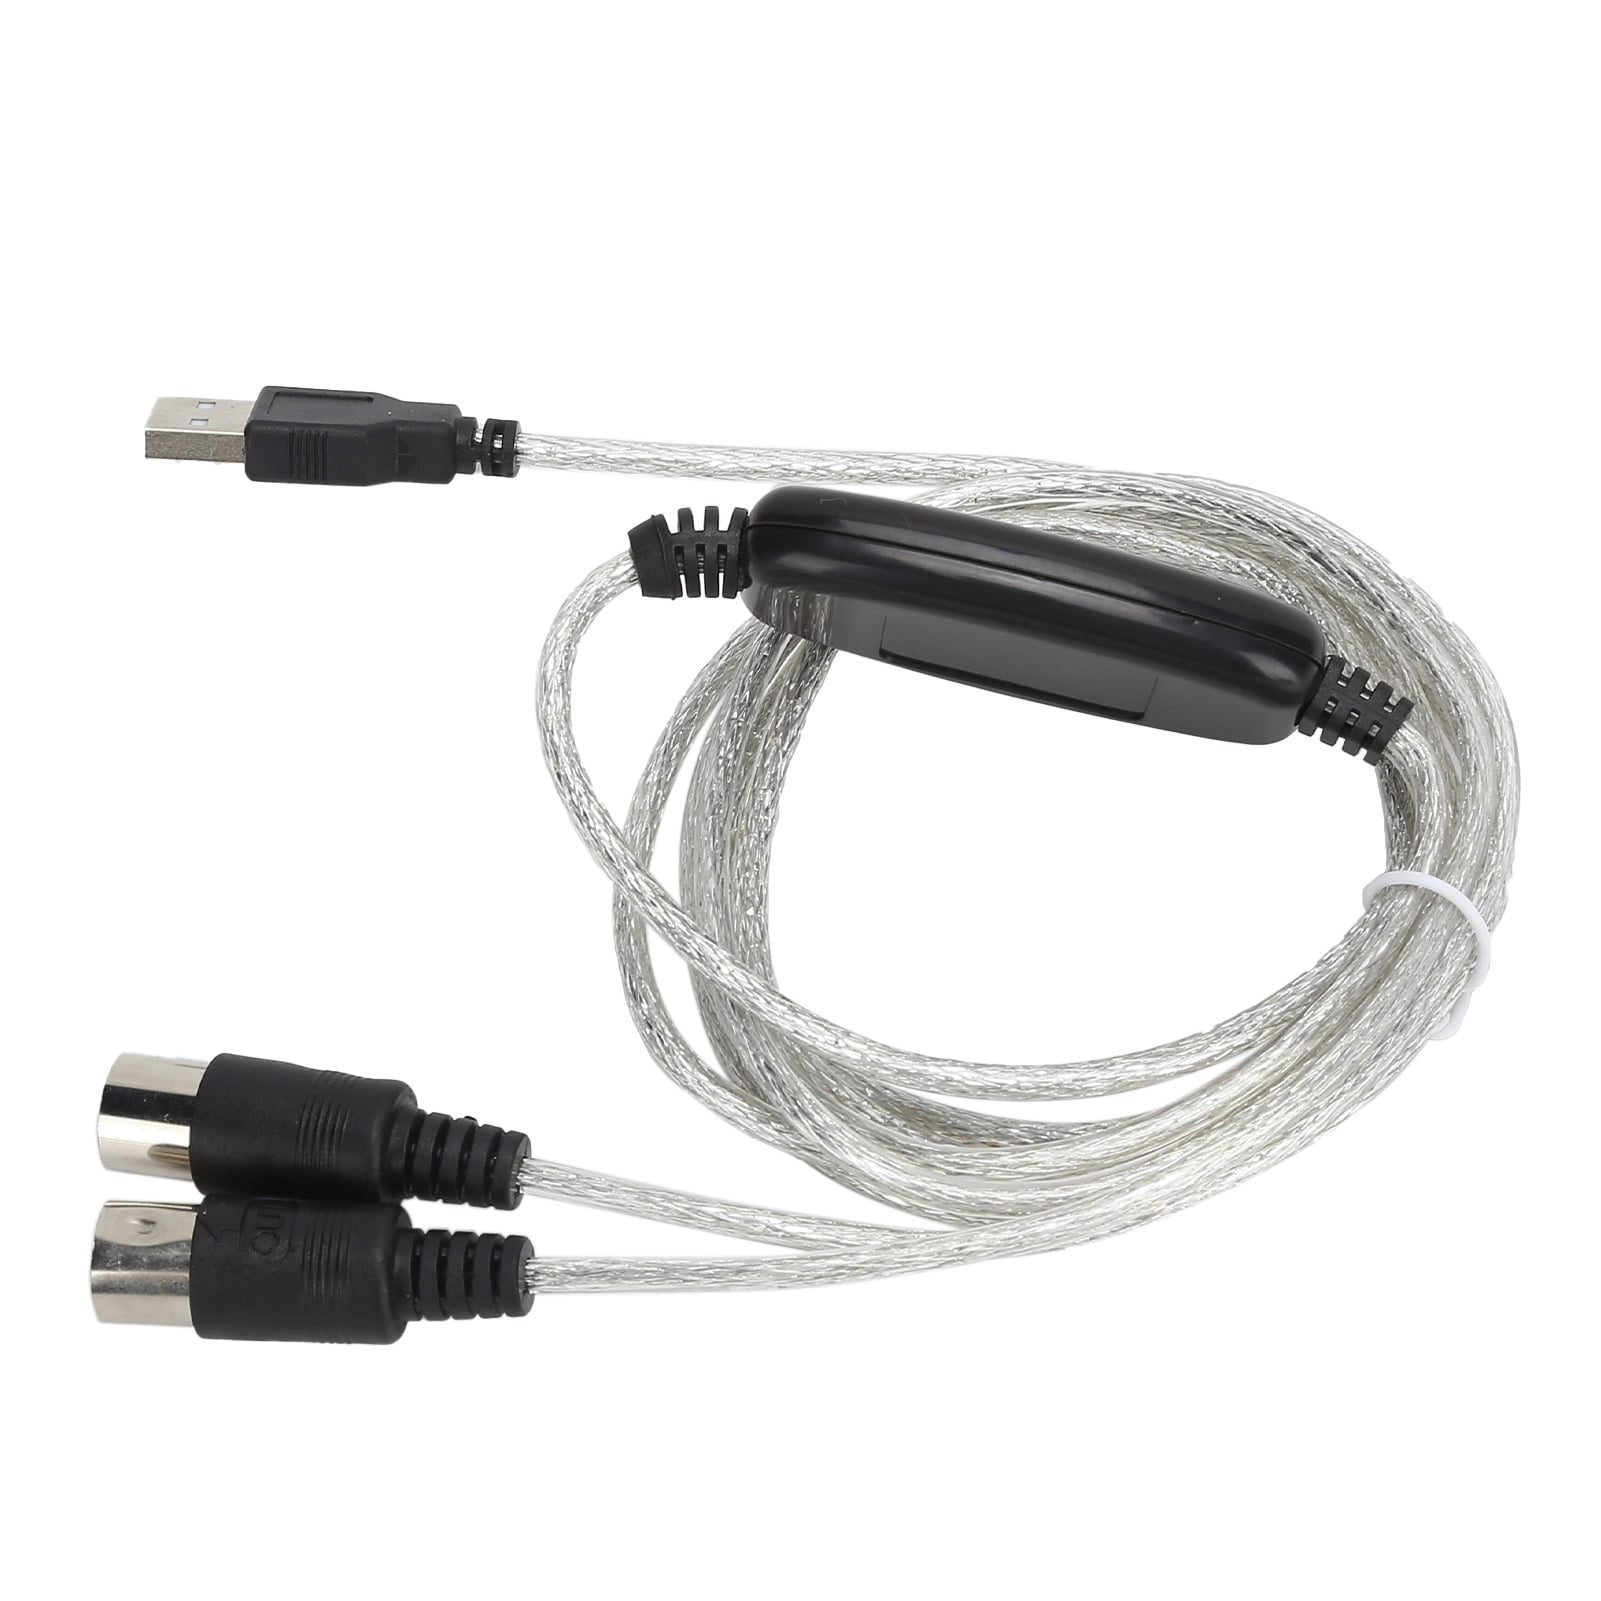 Midi USB Cable, MIDI Cable In Driver LED Indicator For Connect Electronic Musical Instruments Walmart.com